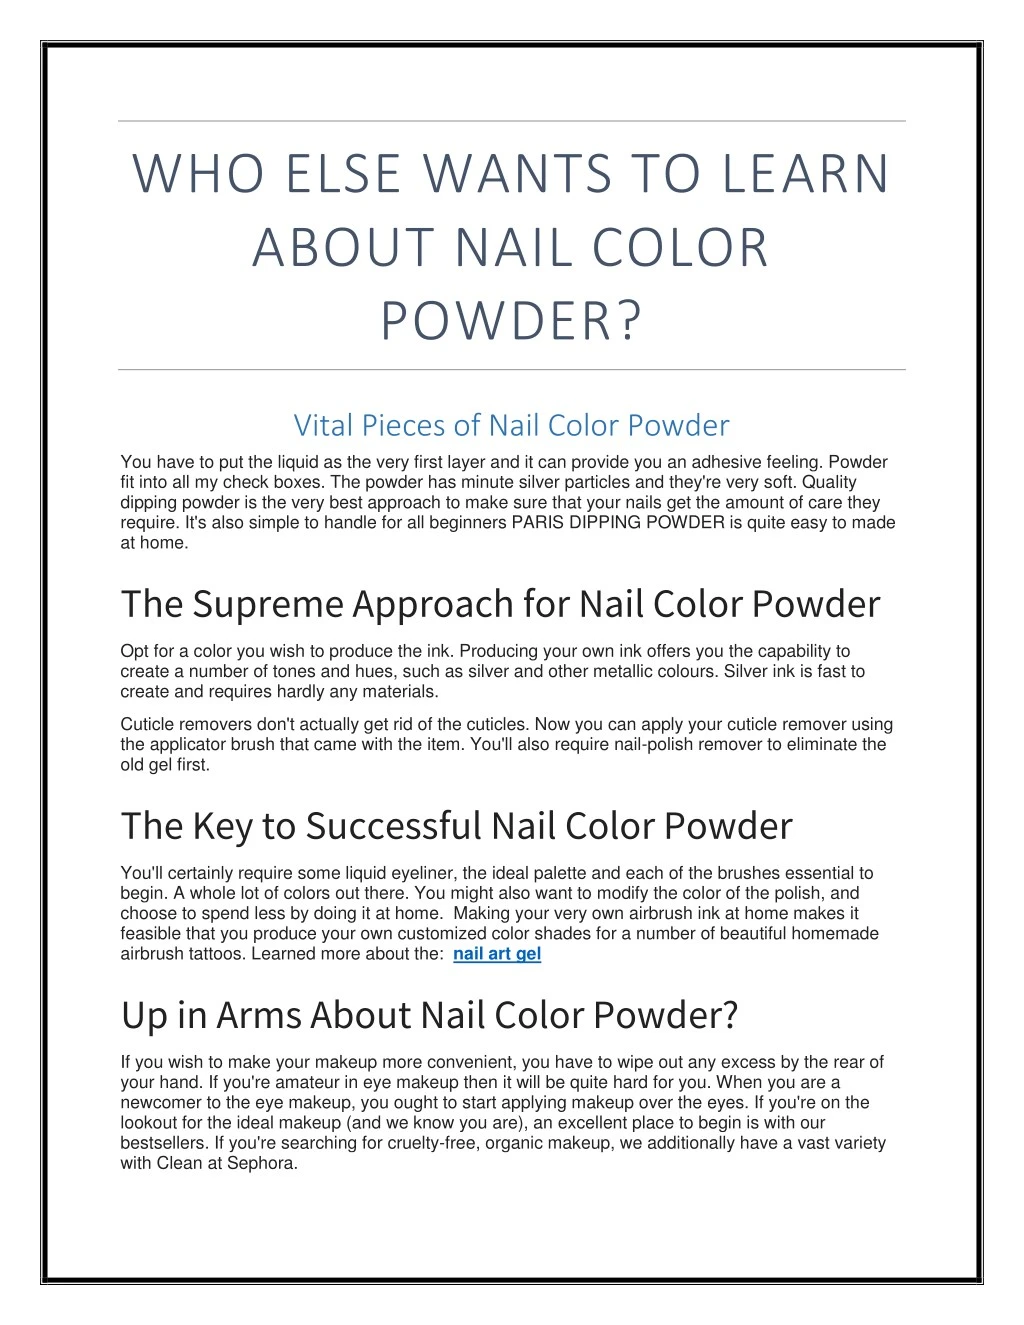 who else wants to learn about nail color powder